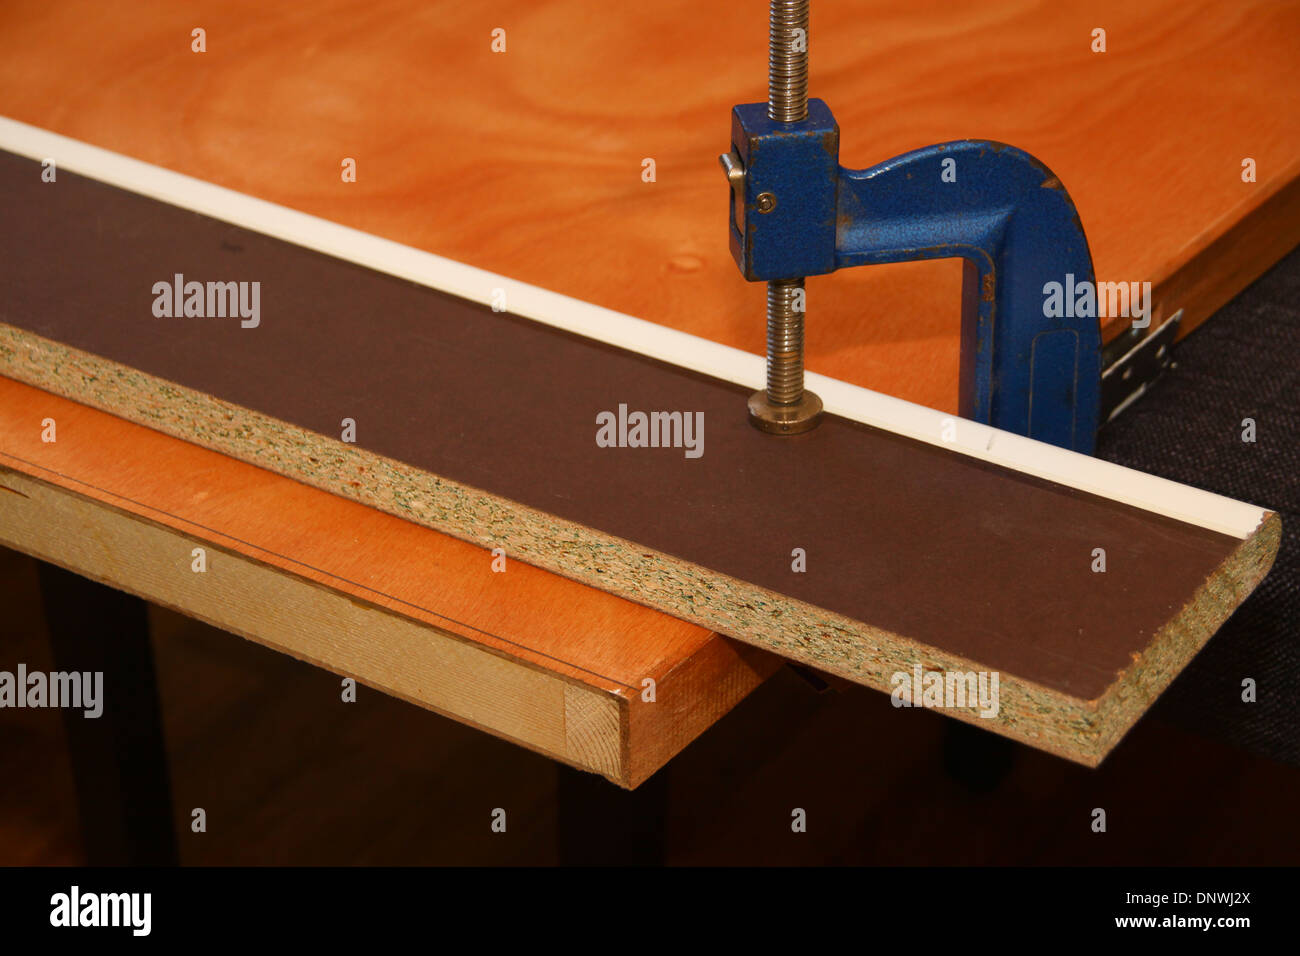 G clamp holding wooden door with scrap timber protective guide Stock Photo